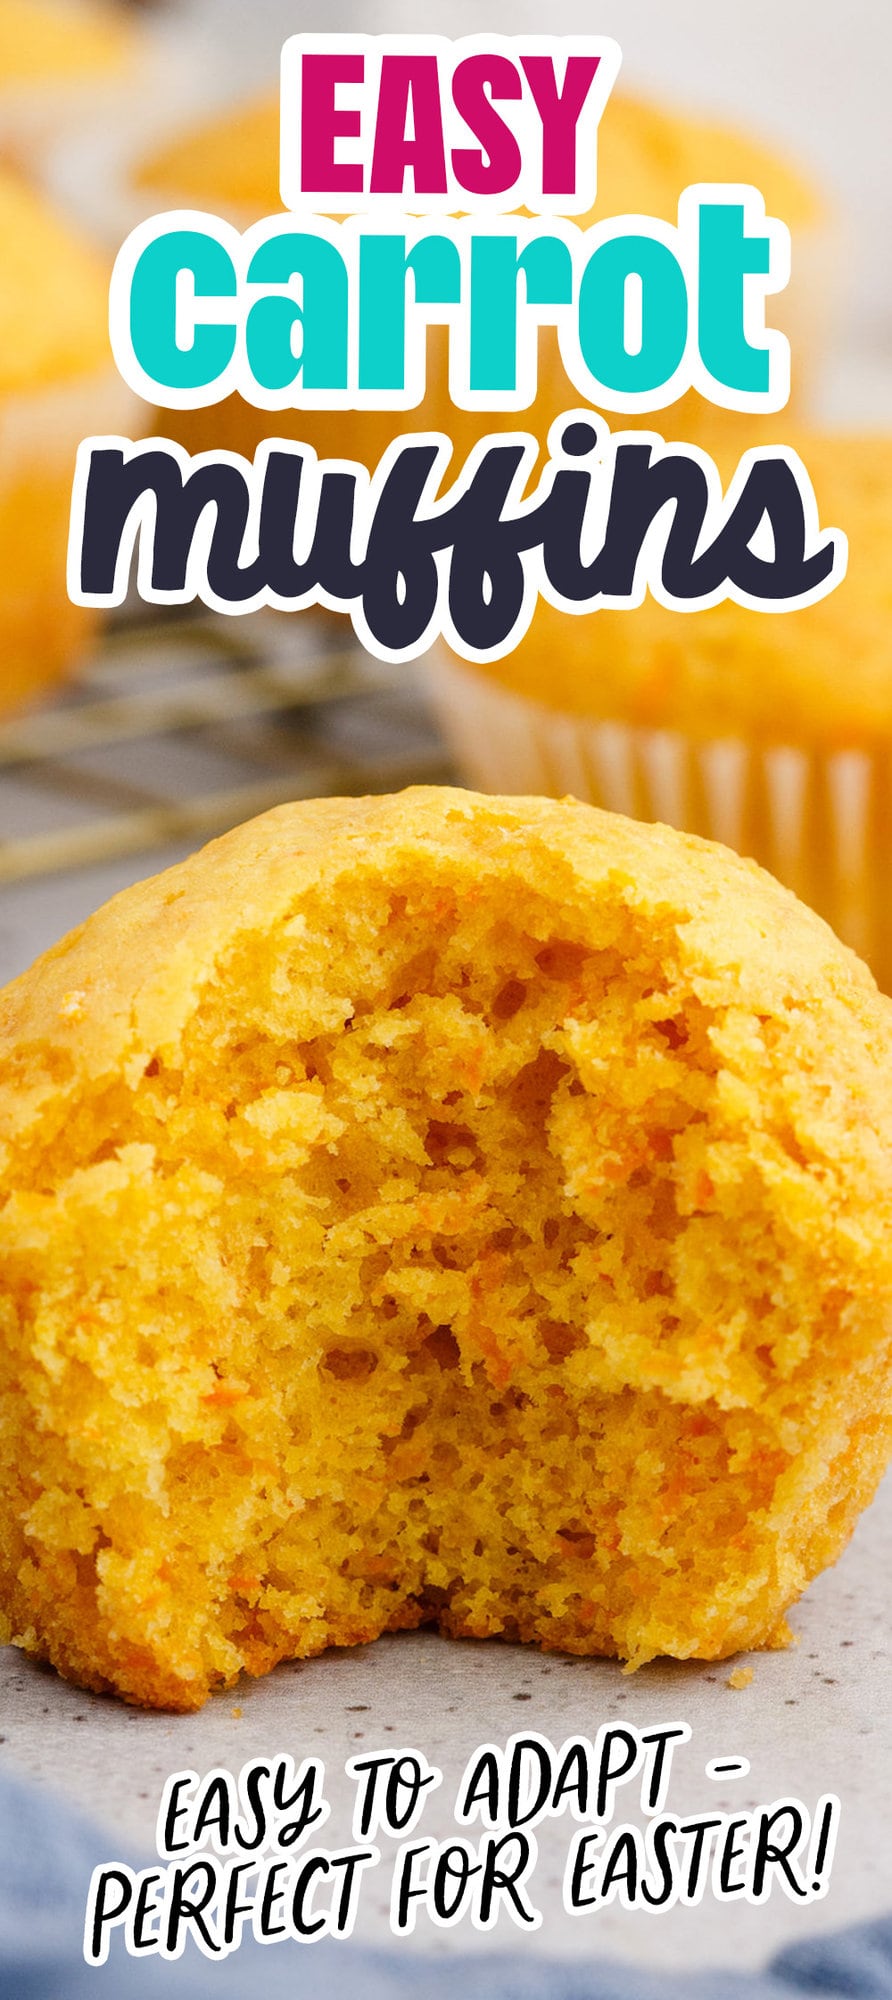 a baked carrot muffin with a big bite taken out of it, showing the light airy texture of the muffin inside